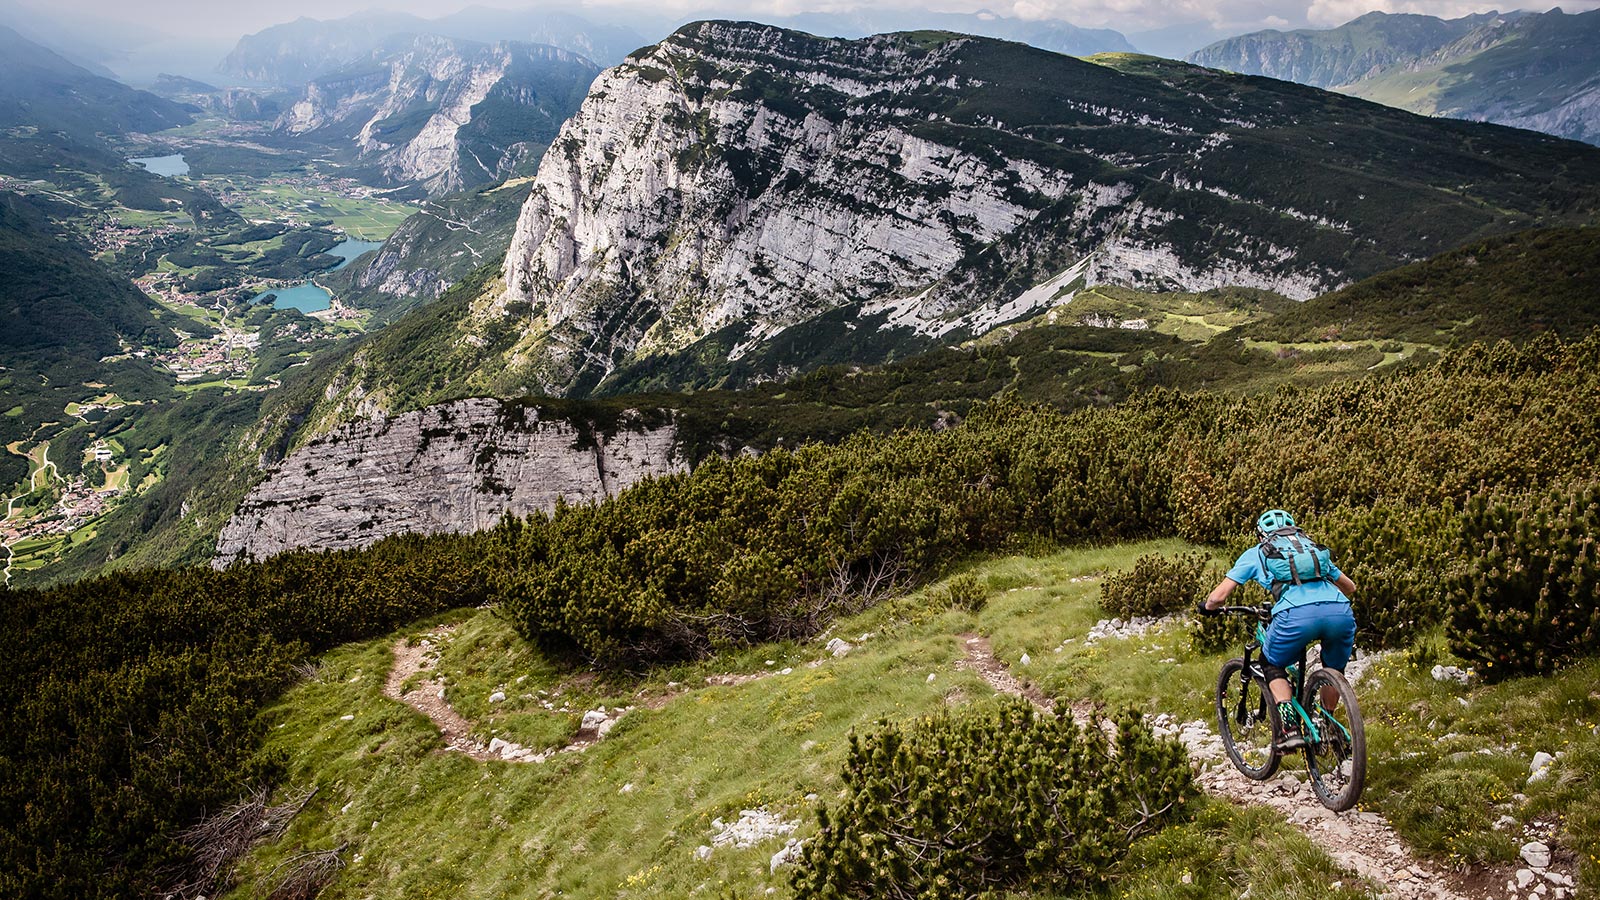 A cyclist is hiking the Brenta Dolomites